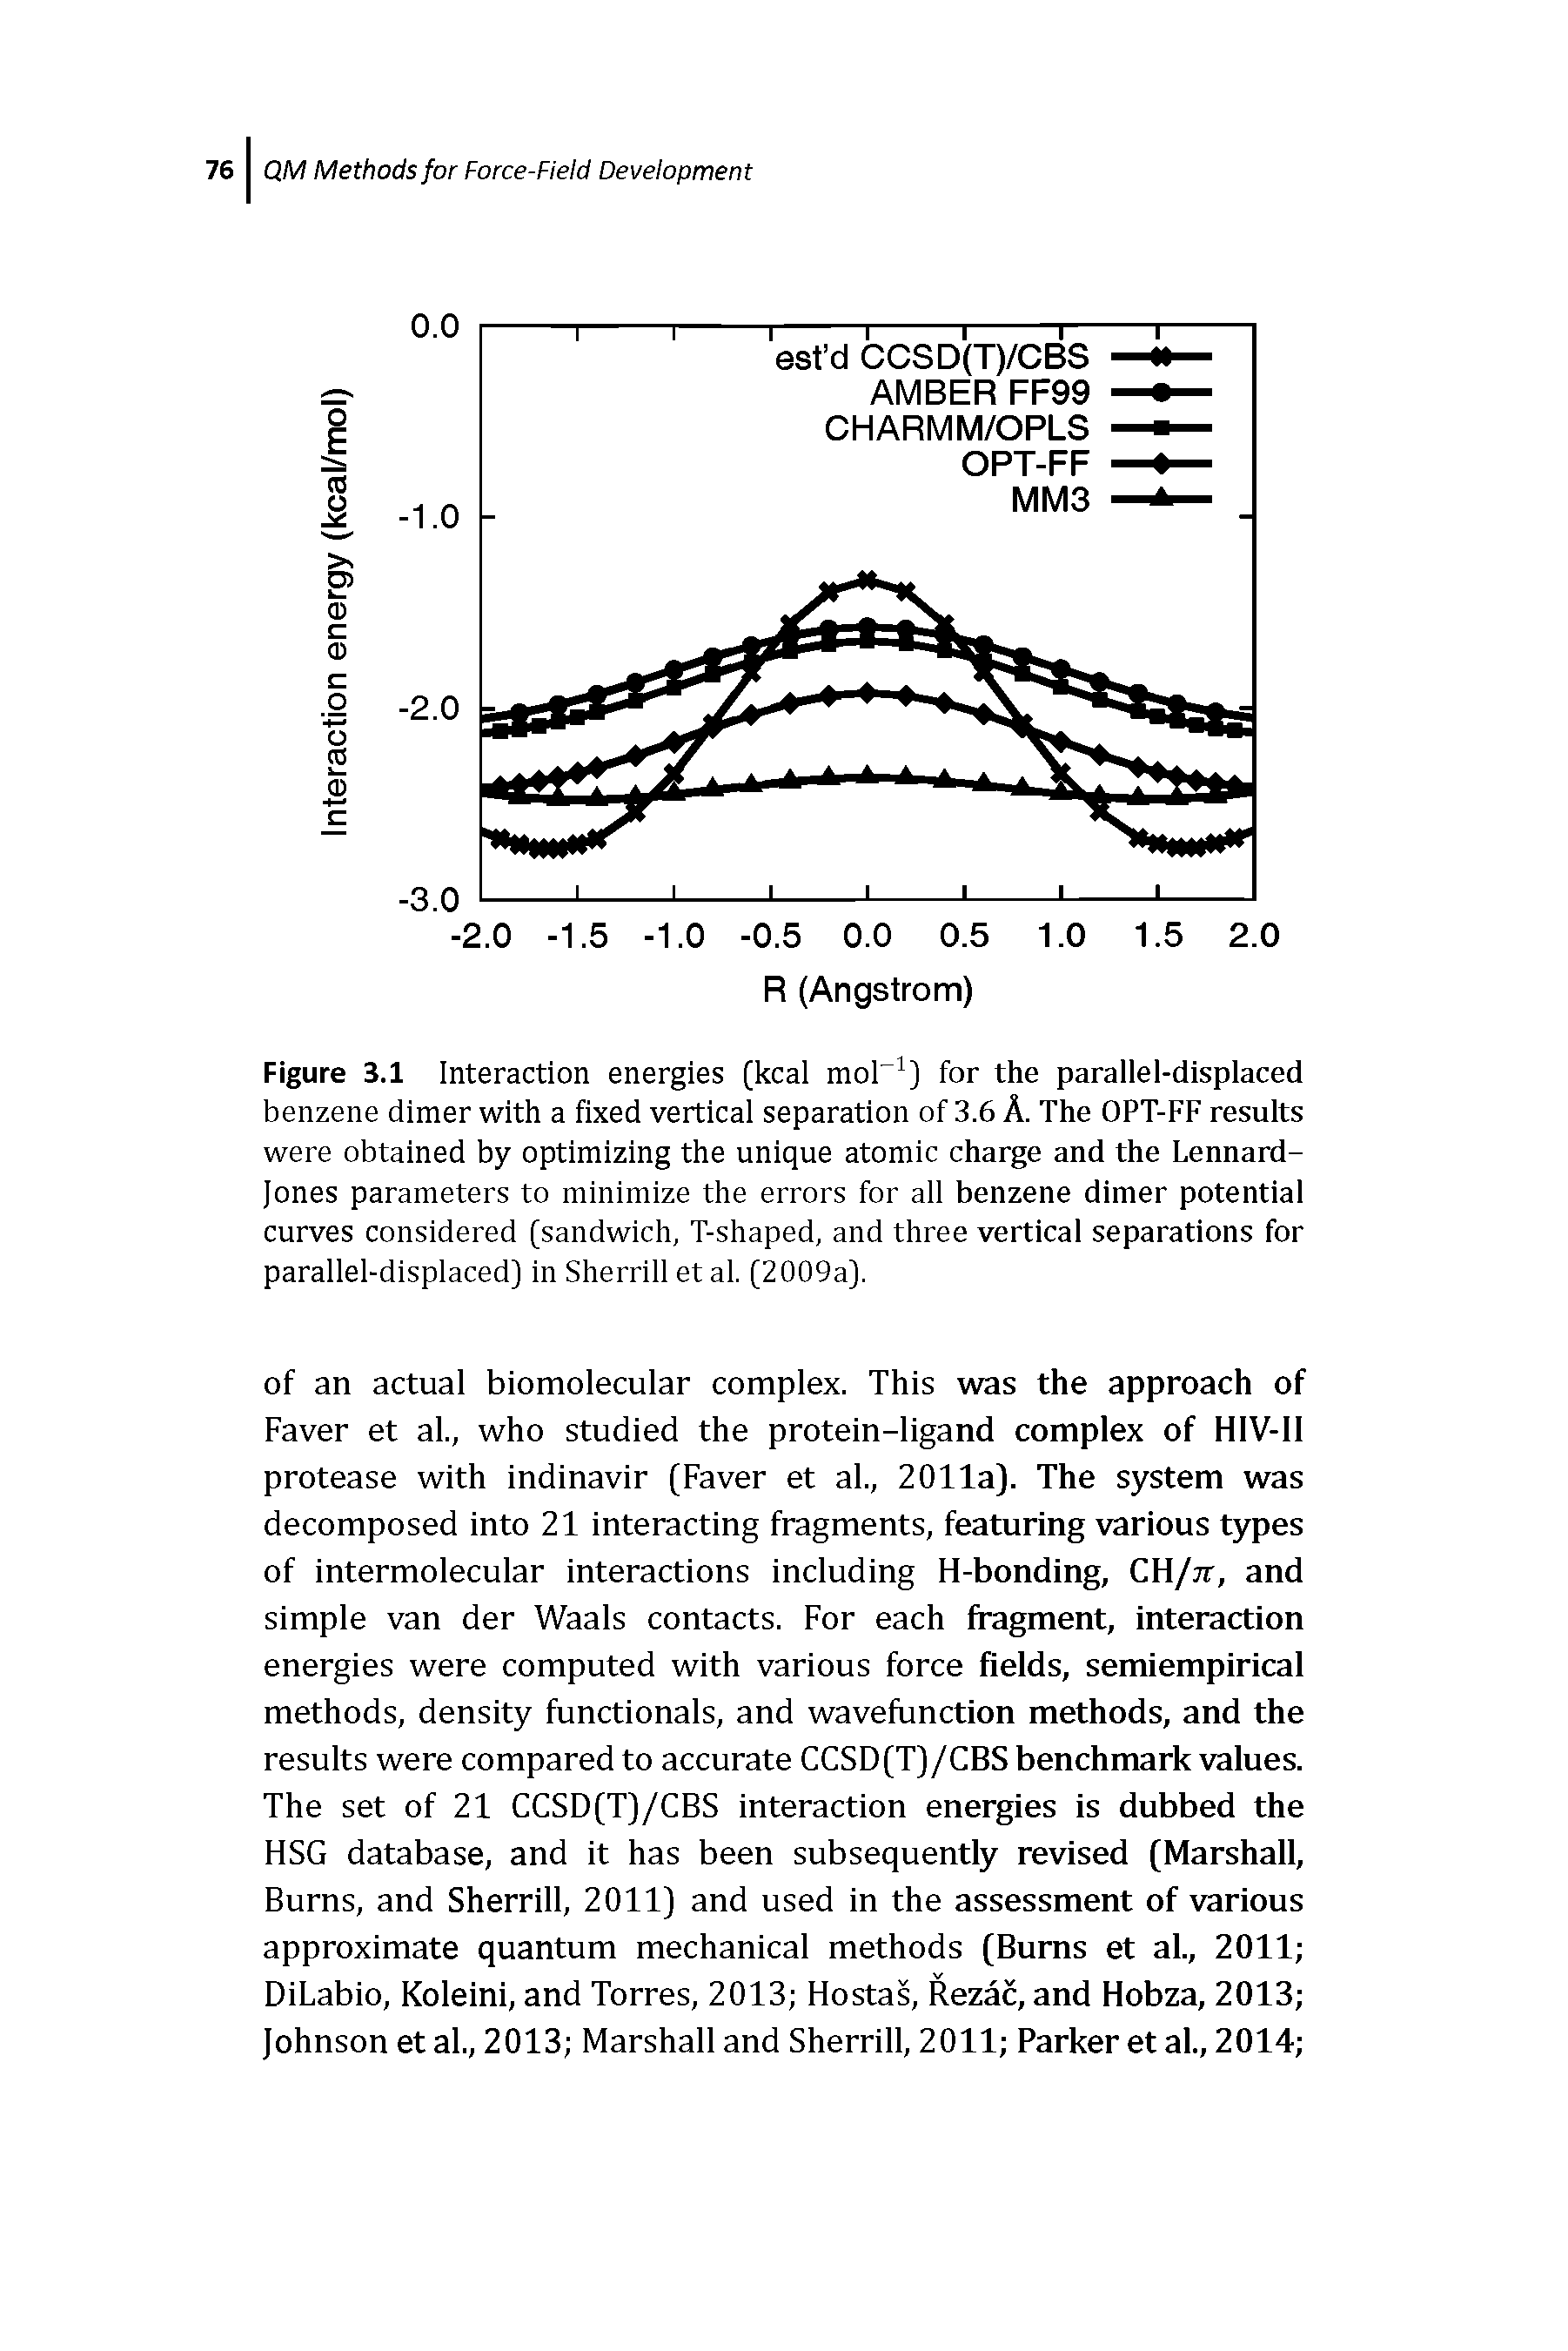 Figure 3.1 Interaction energies (kcal mor ) for the parallel-displaced benzene dimer with a fixed vertical separation of 3.6 A. The OPT-FF results were obtained by optimizing the unique atomic chaise and the Lennard-Jones parameters to minimize the errors for all benzene dimer potential curves considered (sandwich, T-shaped, and three vertical separations for parallel-displaced) in Sherrill et al. (2009a).